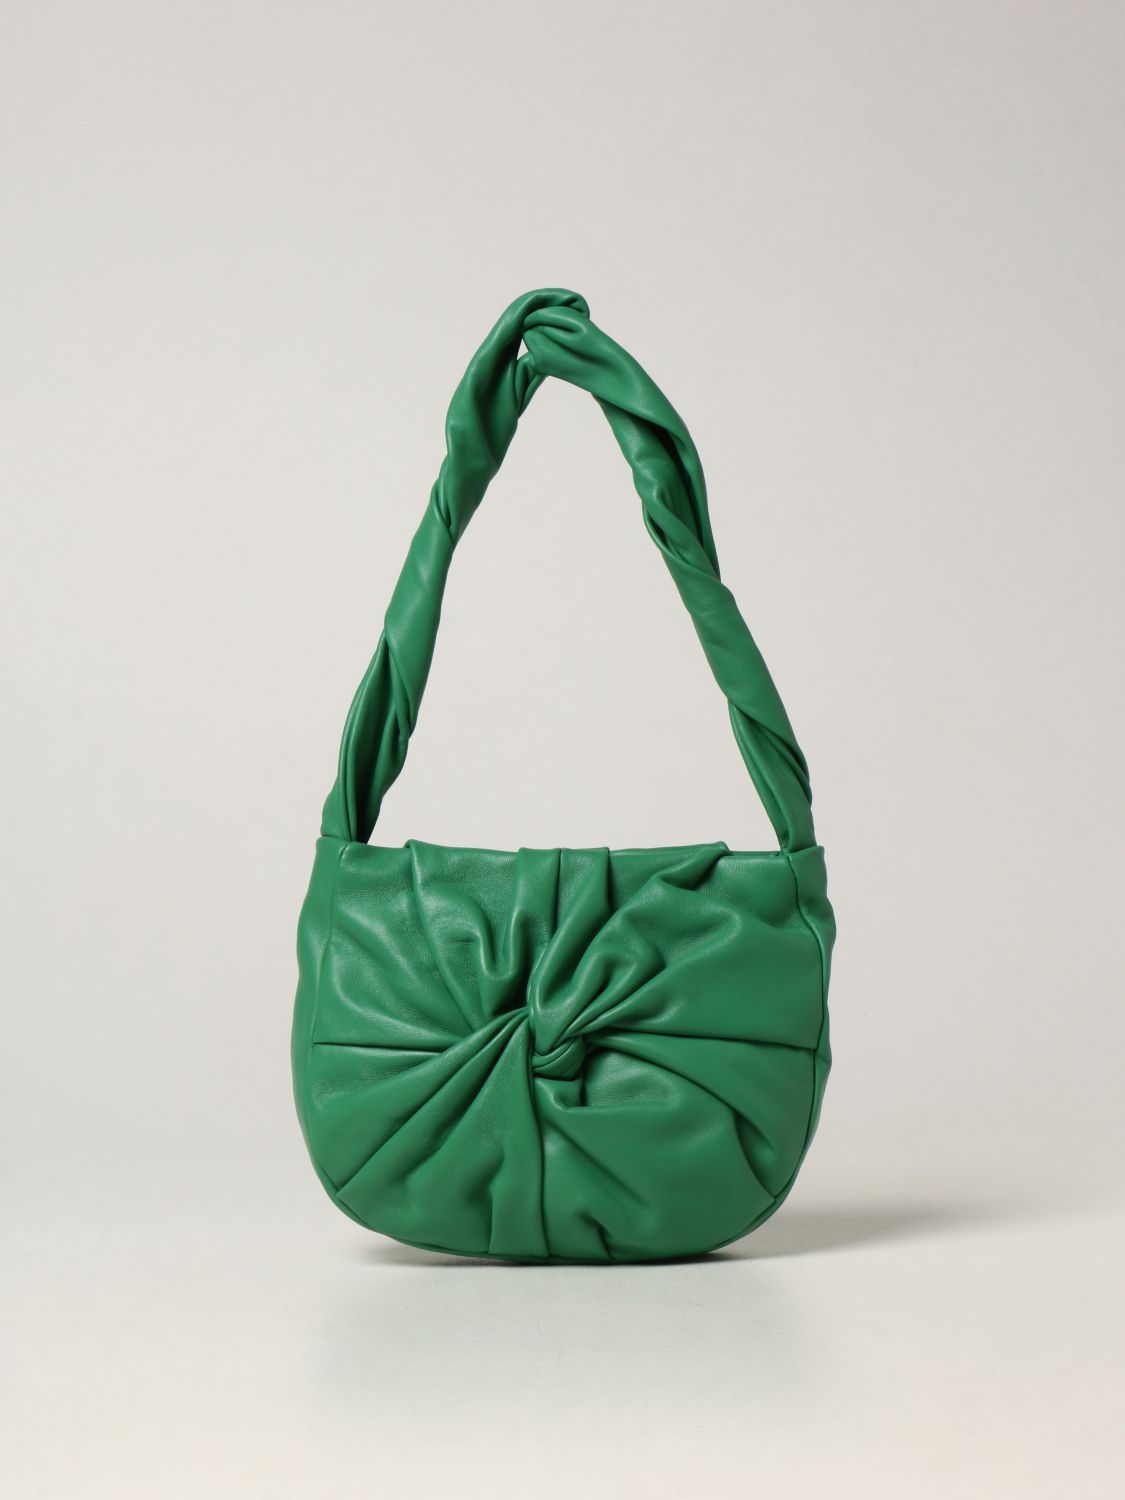 HEREU: Bombon bag in smooth nappa - Turquoise